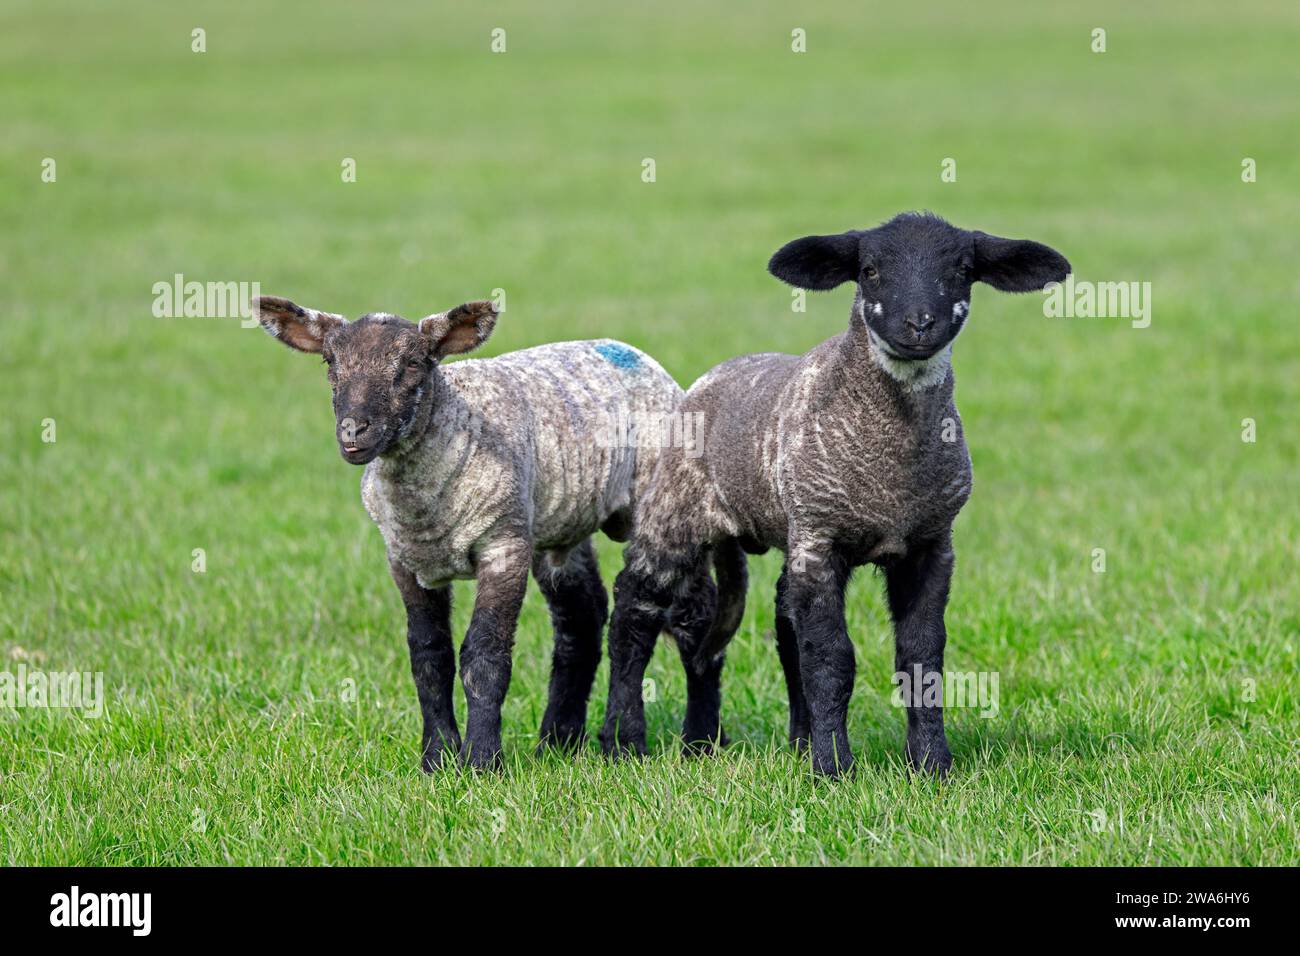 Two black and white lambs of domestic sheep in meadow / field in spring, Schleswig-Holstein, Germany Stock Photo